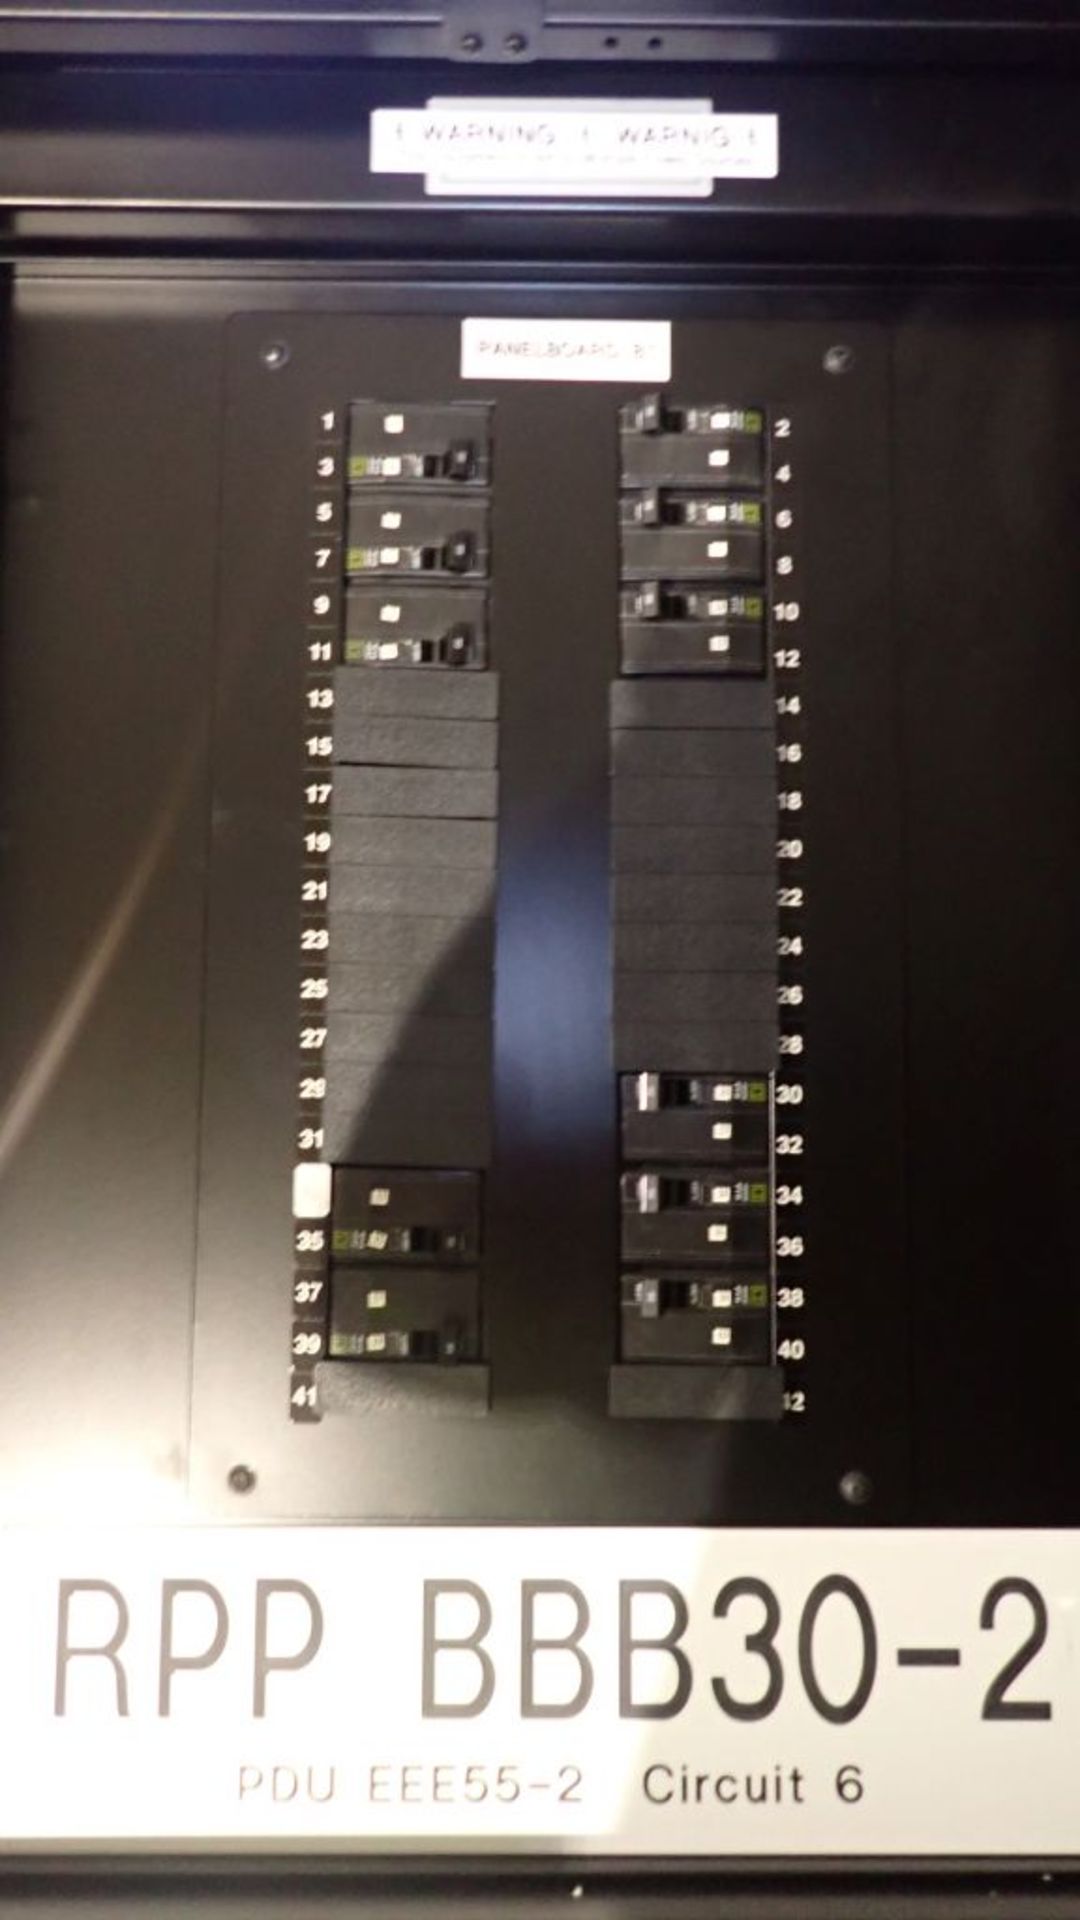 Onyx Power Rack Panelboard | Part No. 98-112-00-00; System 2; Input: 208/120 VAC; 4-Wire Plus Ground - Image 4 of 21